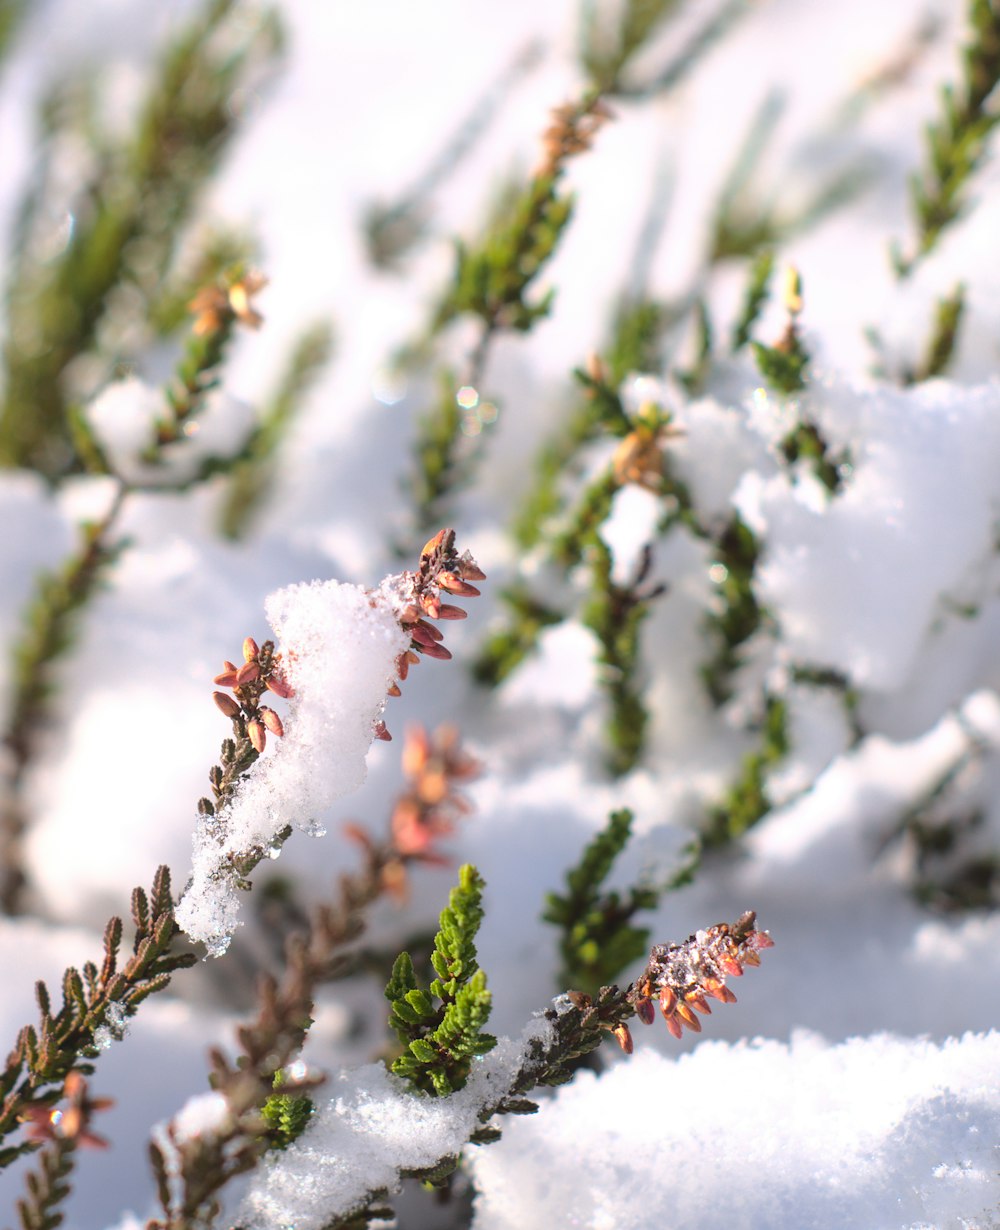 green and brown plant covered with snow